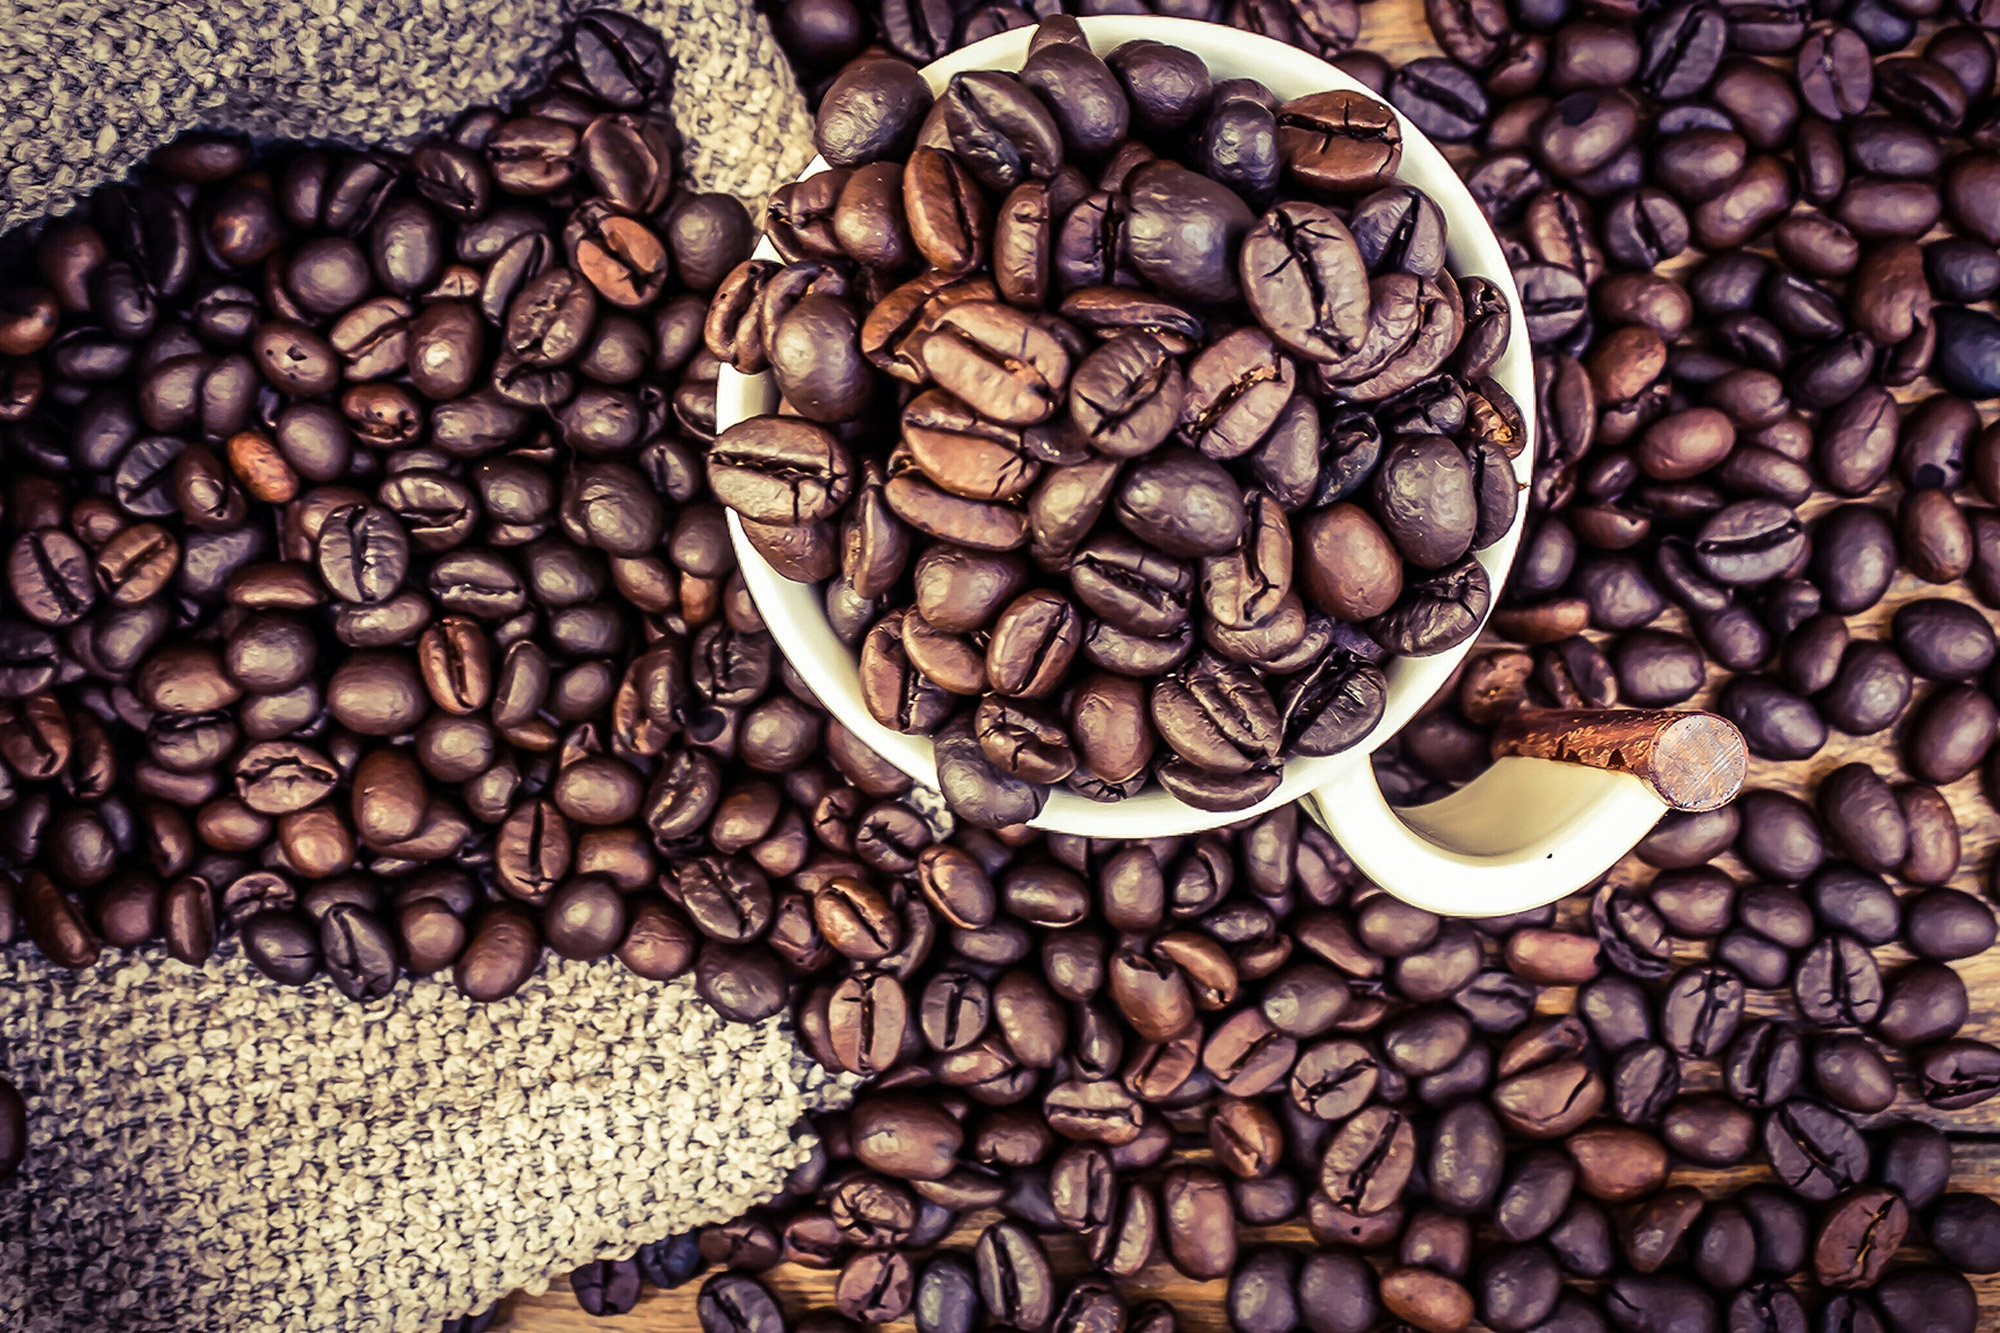 Explore the Different Varieties of Coffee Beans